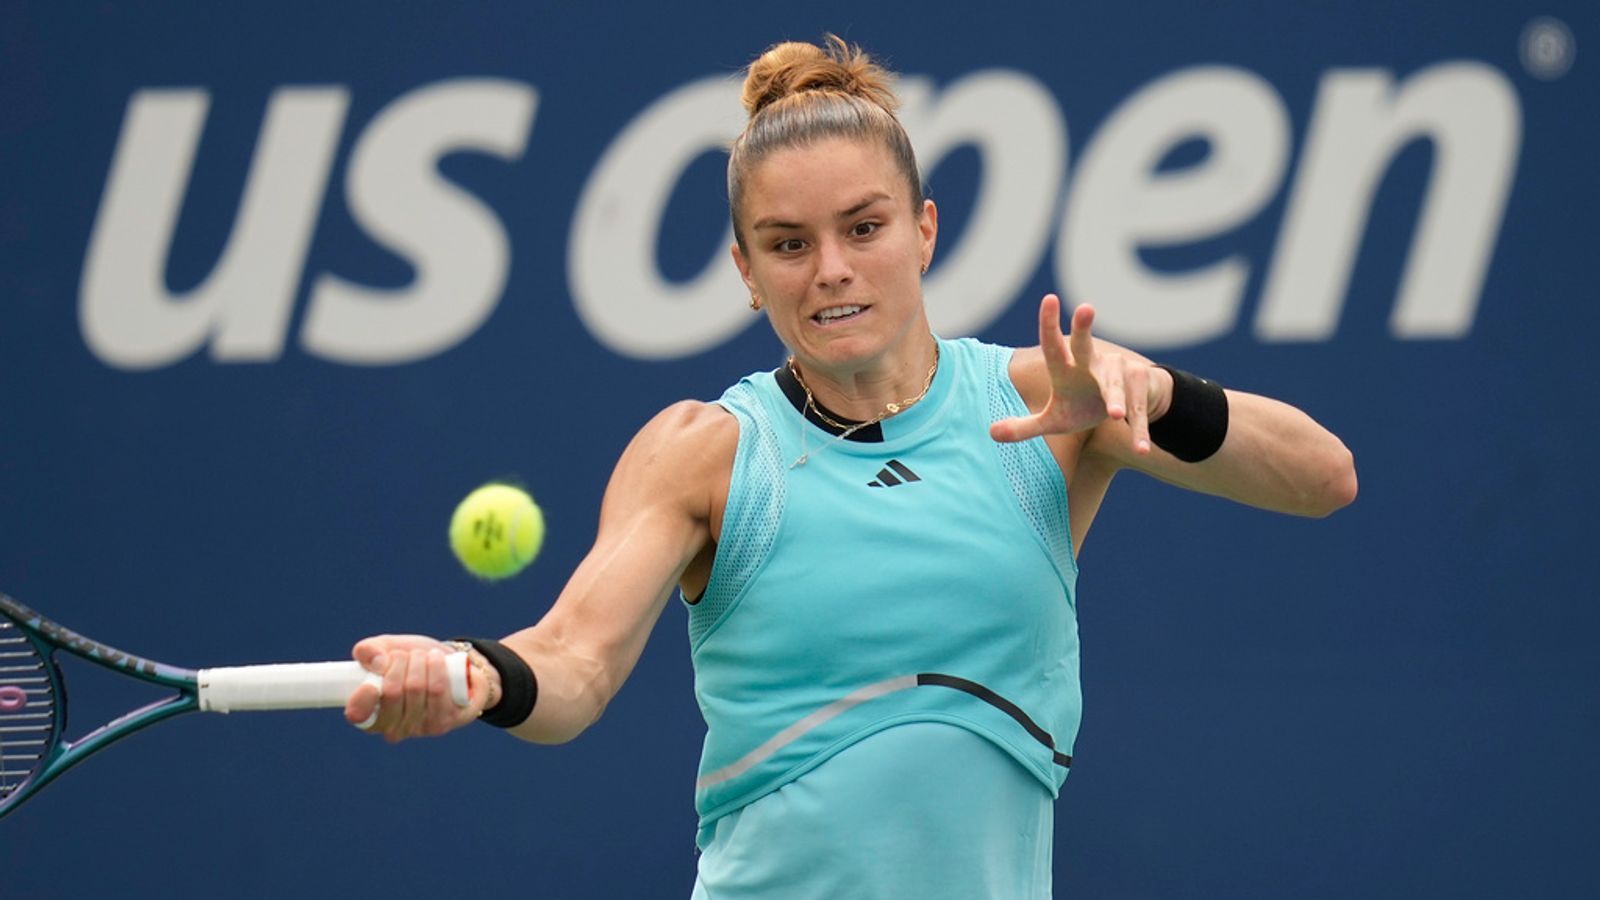 Tennis player Maria Sakkari complains of 'weed' smell before shock defeat at US Open